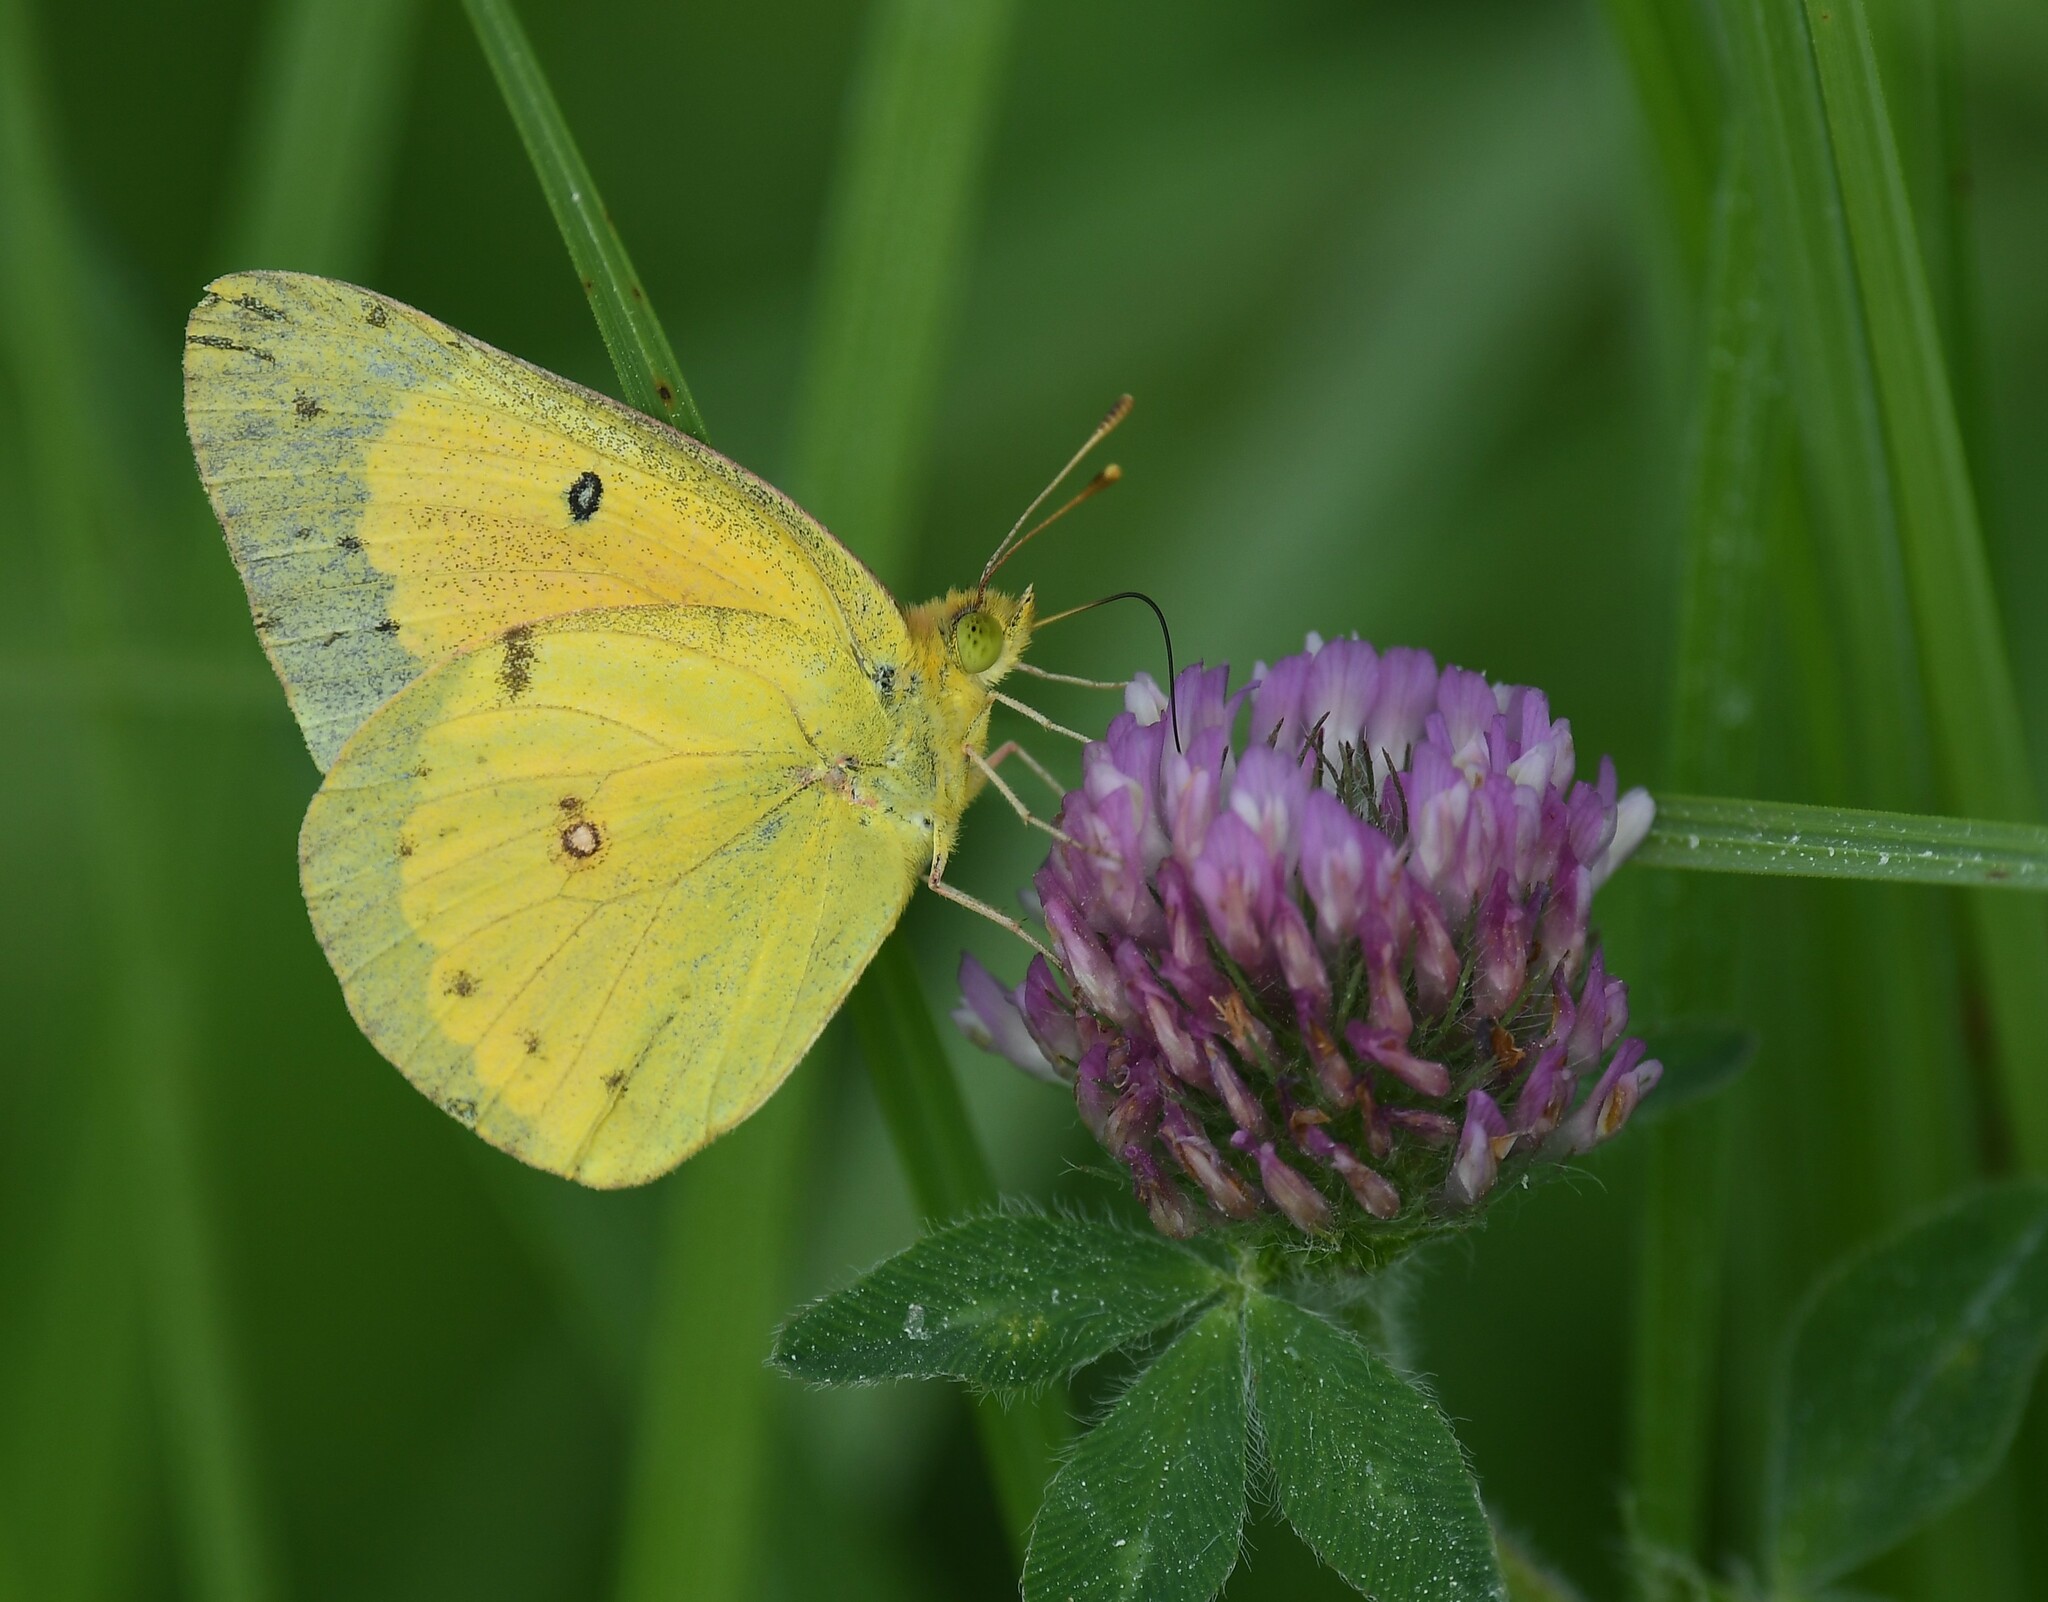 A clouded sulphur butterfly on a purple flower, with their proboscis extended into the flower 